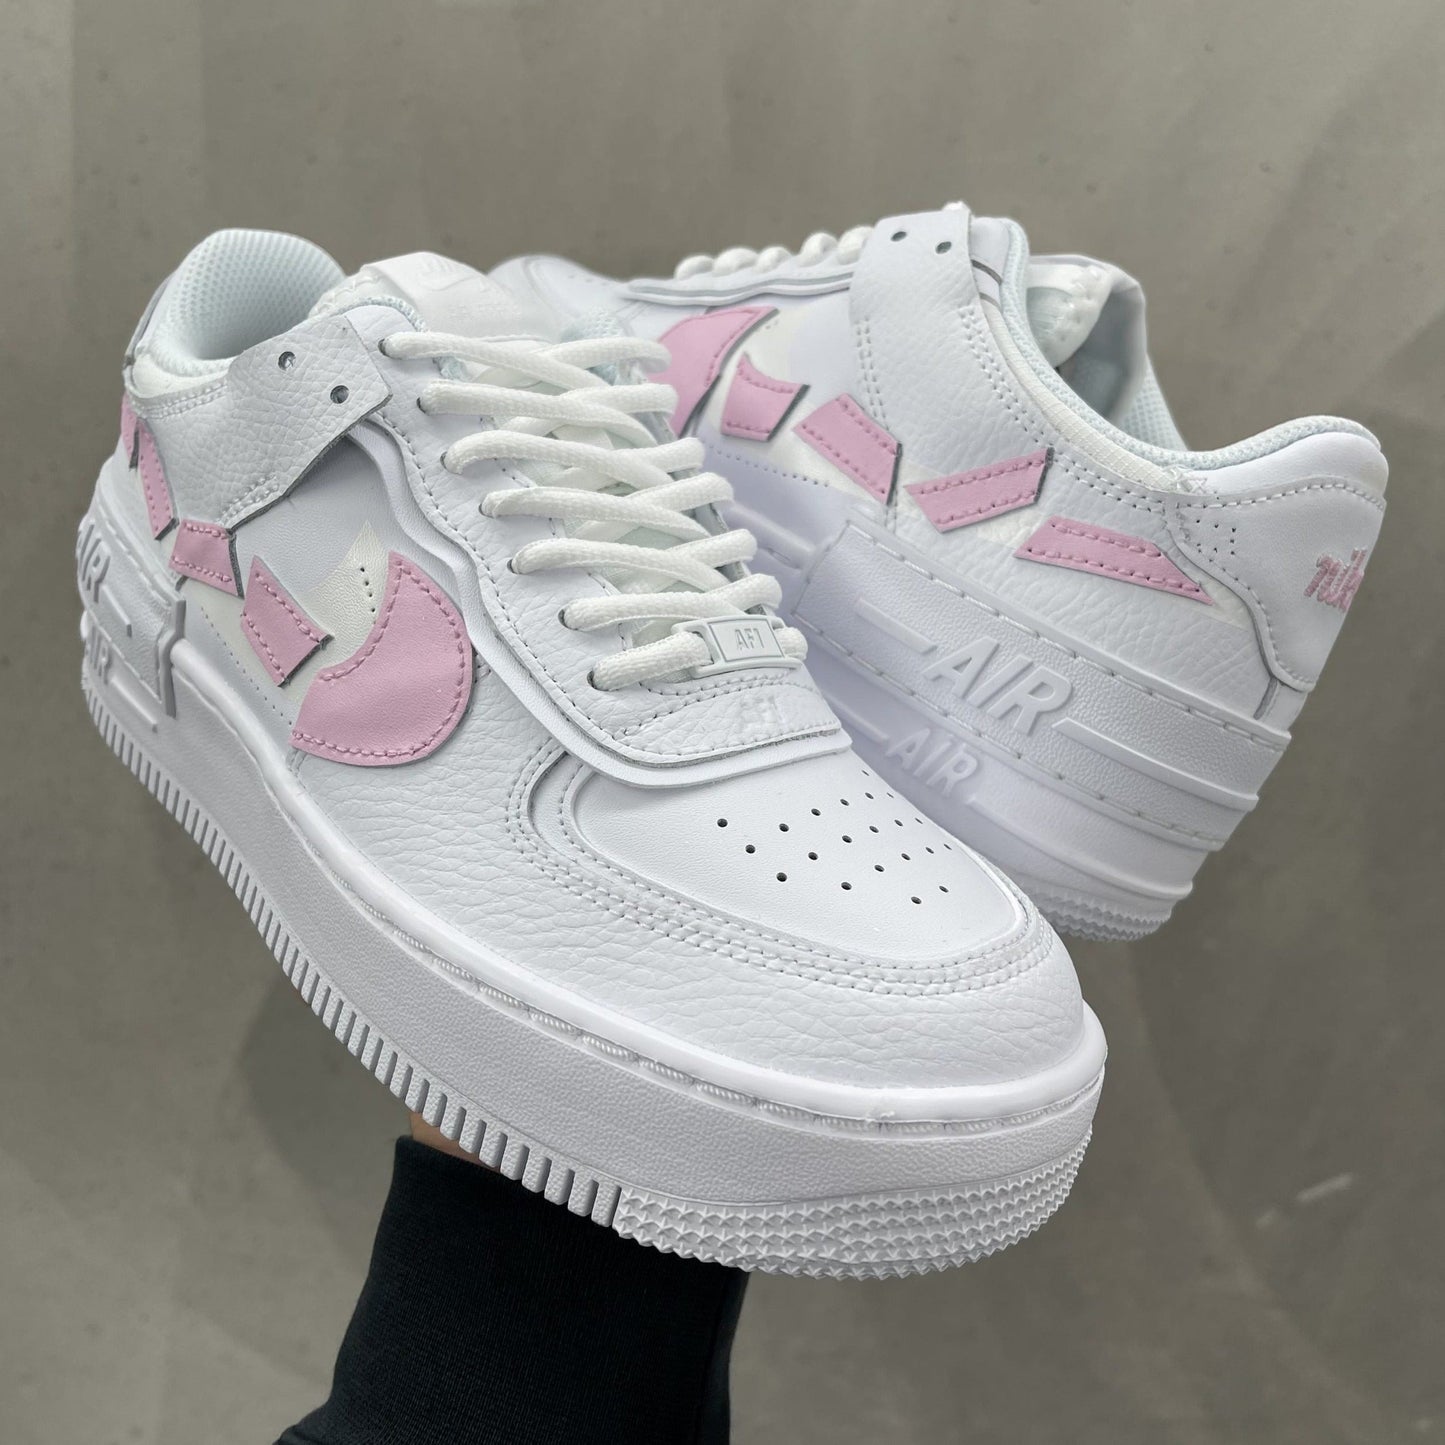 Custom AIR FORCE 1 shadow - Destroyed swooshes (pink)